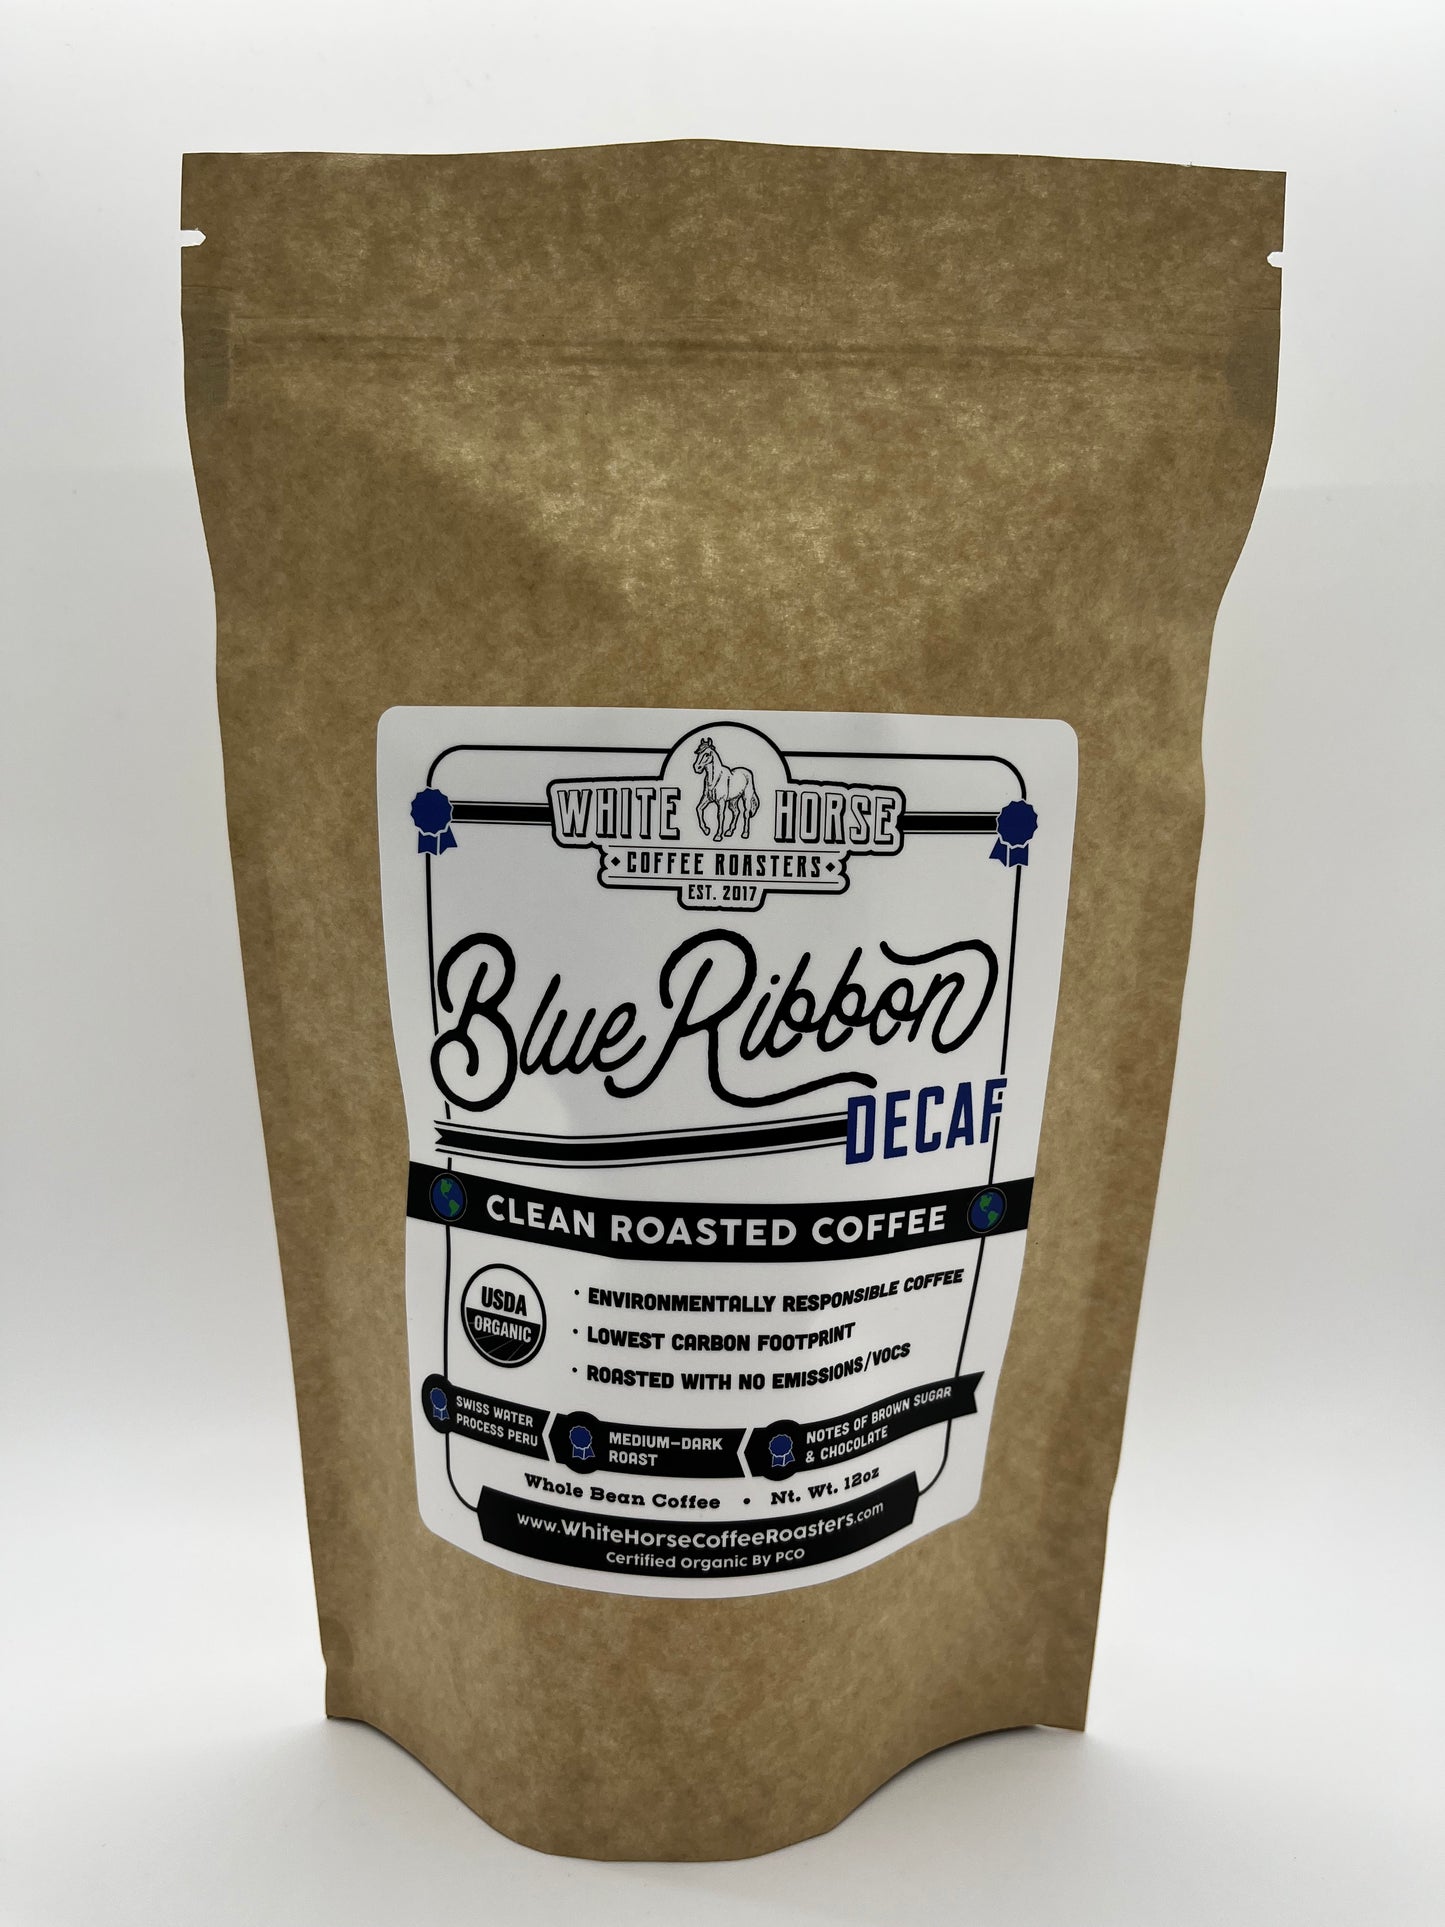 
                  
                    Blue Ribbon Decaf Wholesale Wholesale - Source your coffee supply wholesale from White Horse Coffee Roasters for consistent quality in every batch.
                  
                